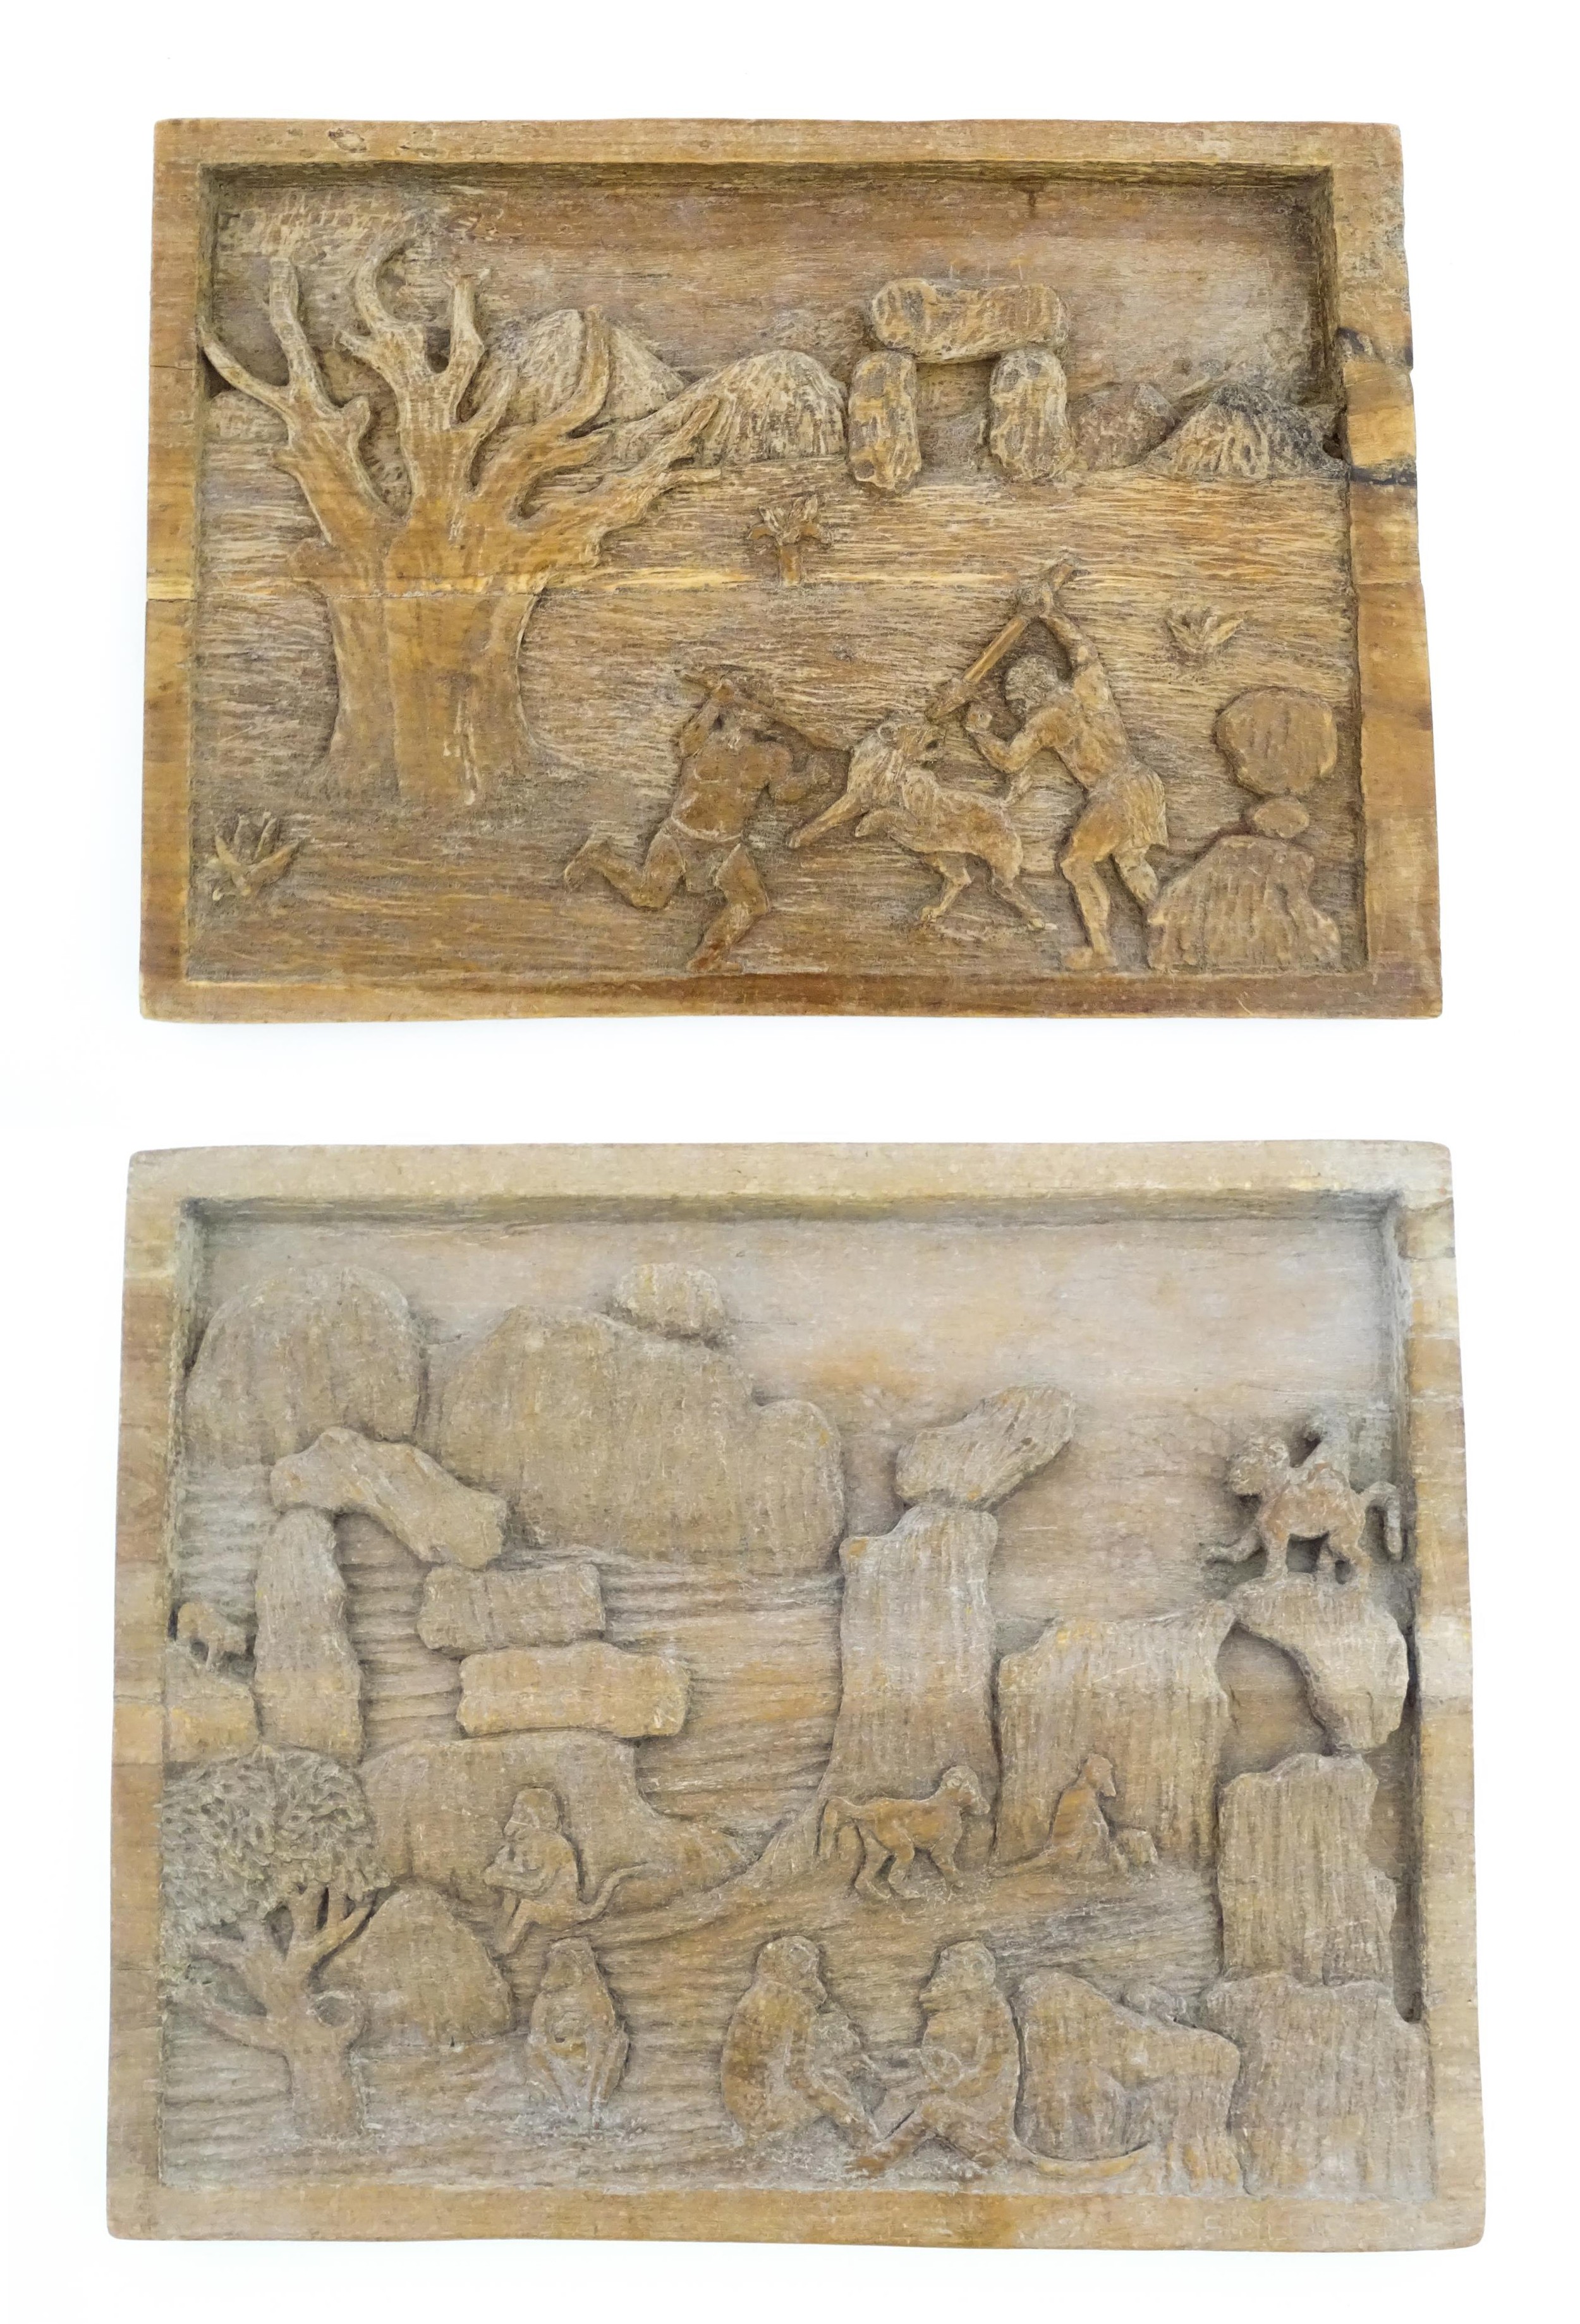 Ethnographic / Native / Tribal: Two carved wooden tableaux / plaques, one depicting monkeys in a